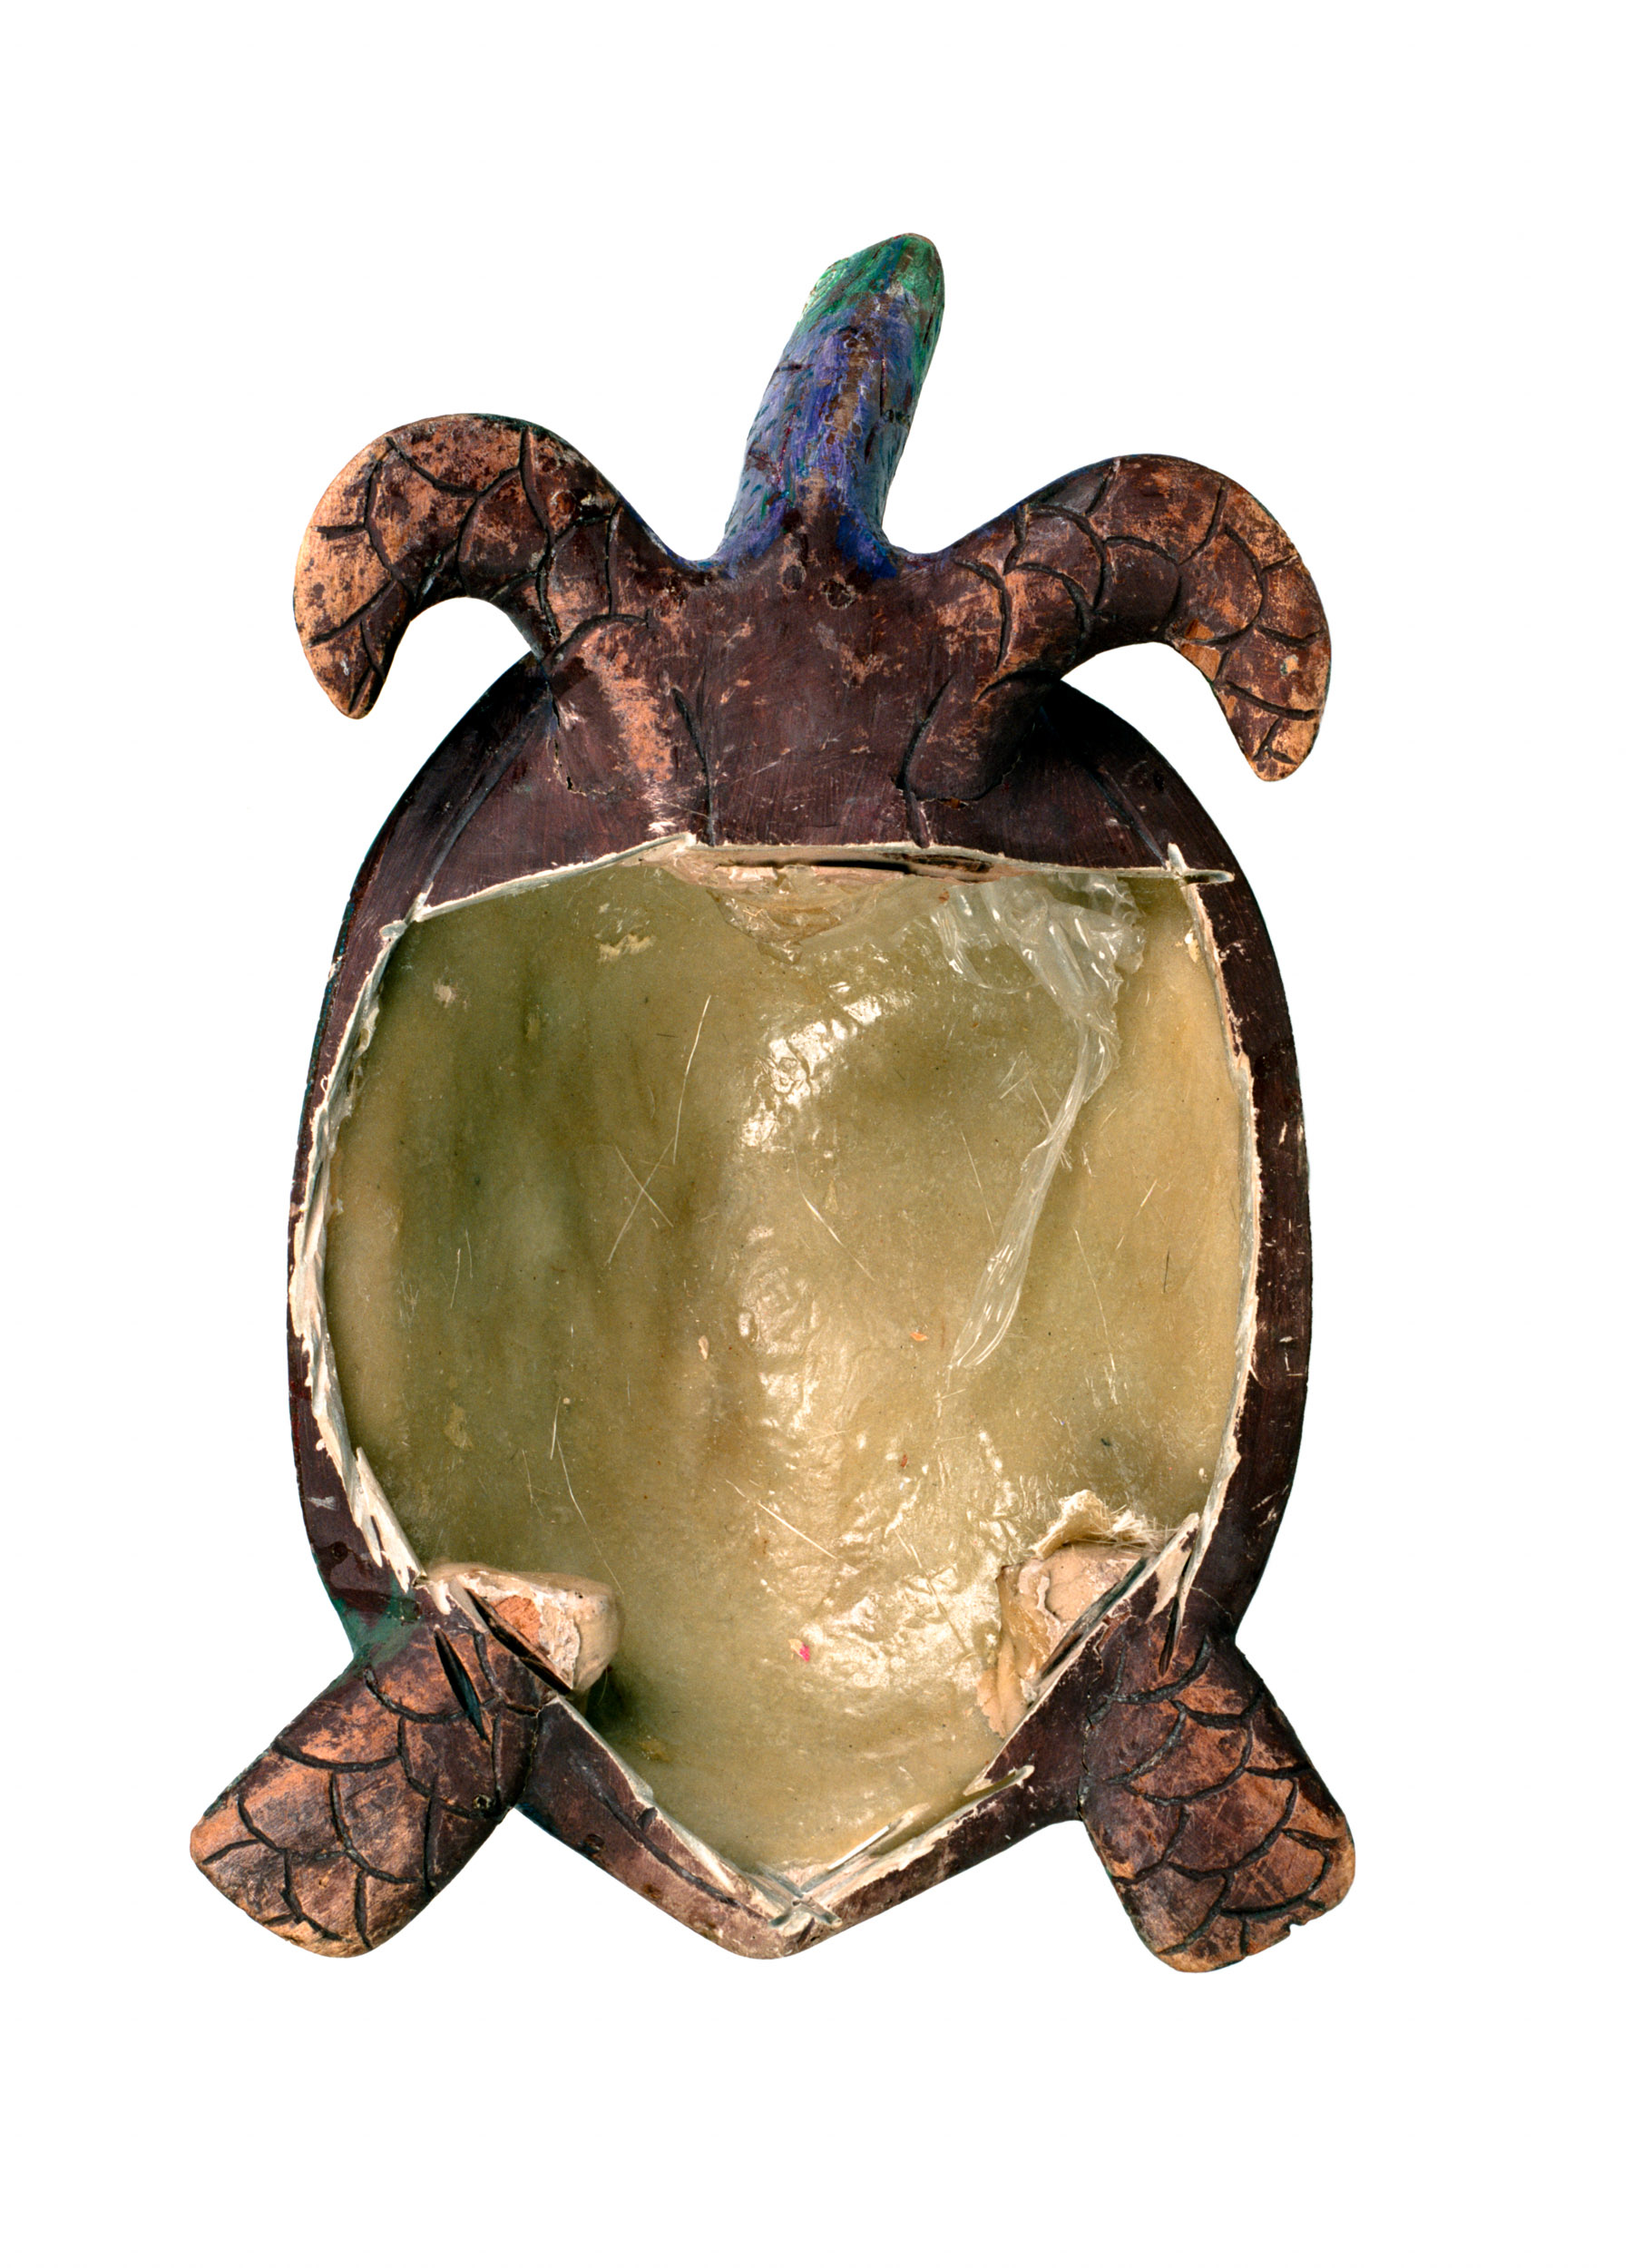 Polycarbonate turtle, intercepted and found to be filled with co